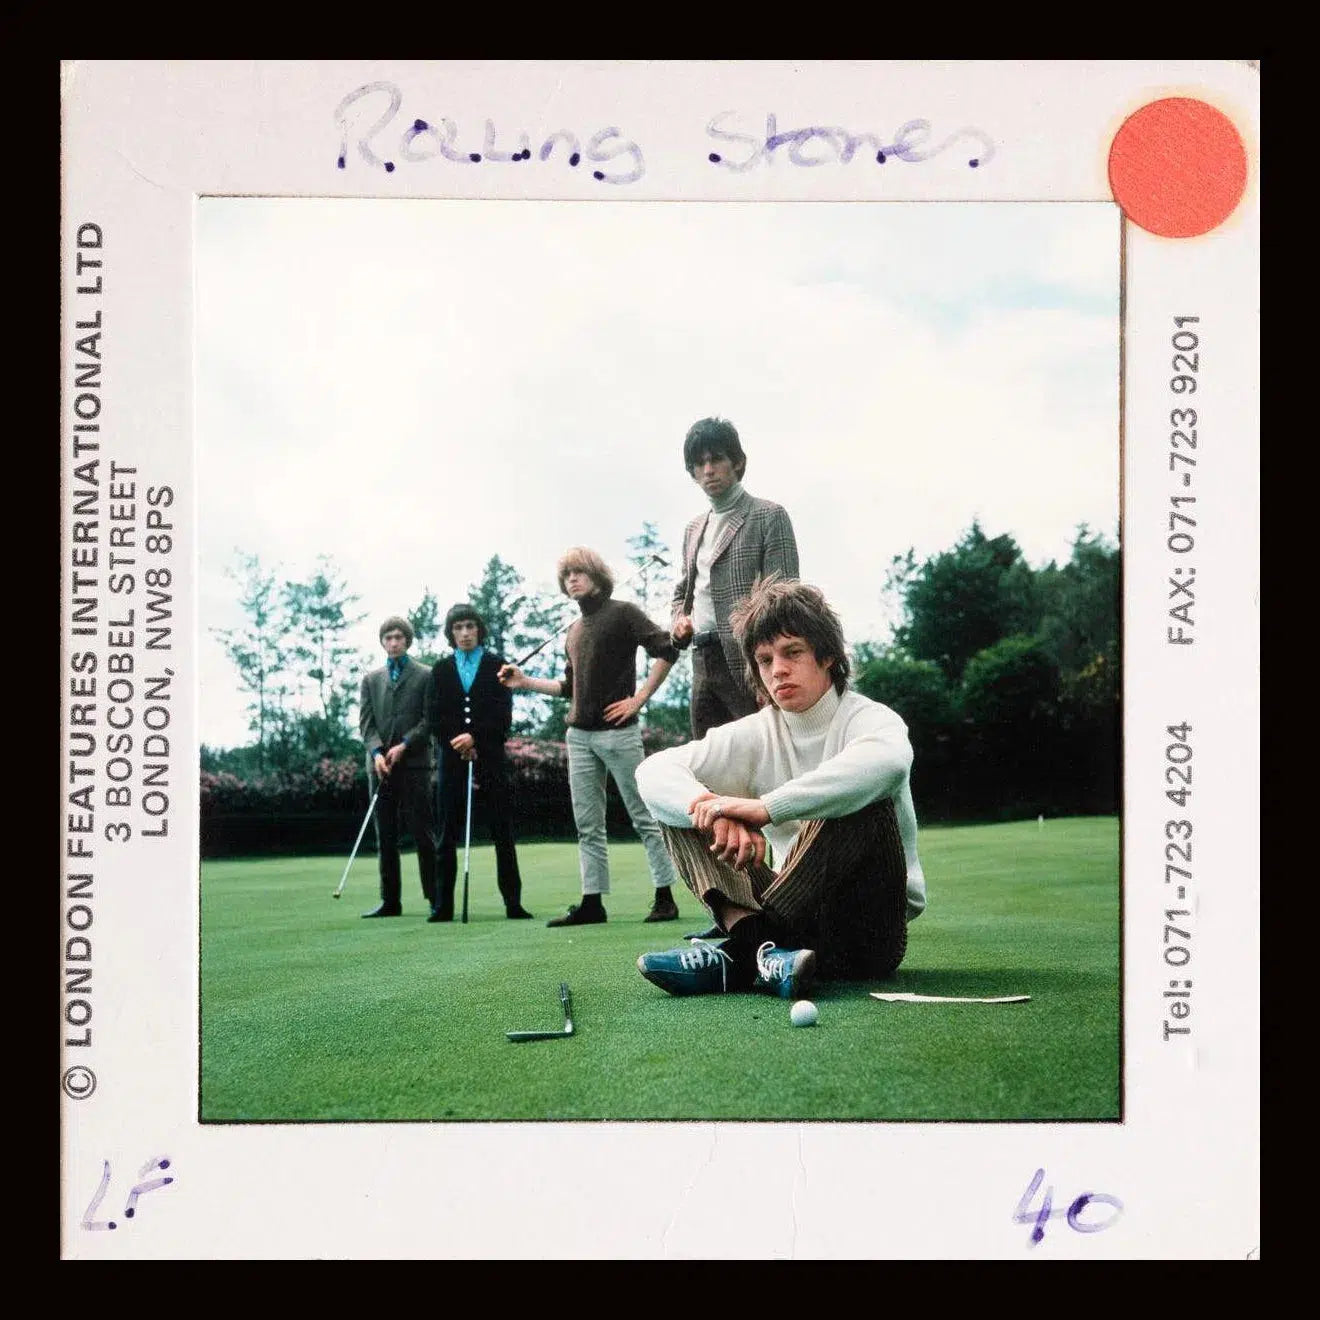 The Rolling Stones - Slide 12 (golf), from The Wild Ones collection-PurePhoto